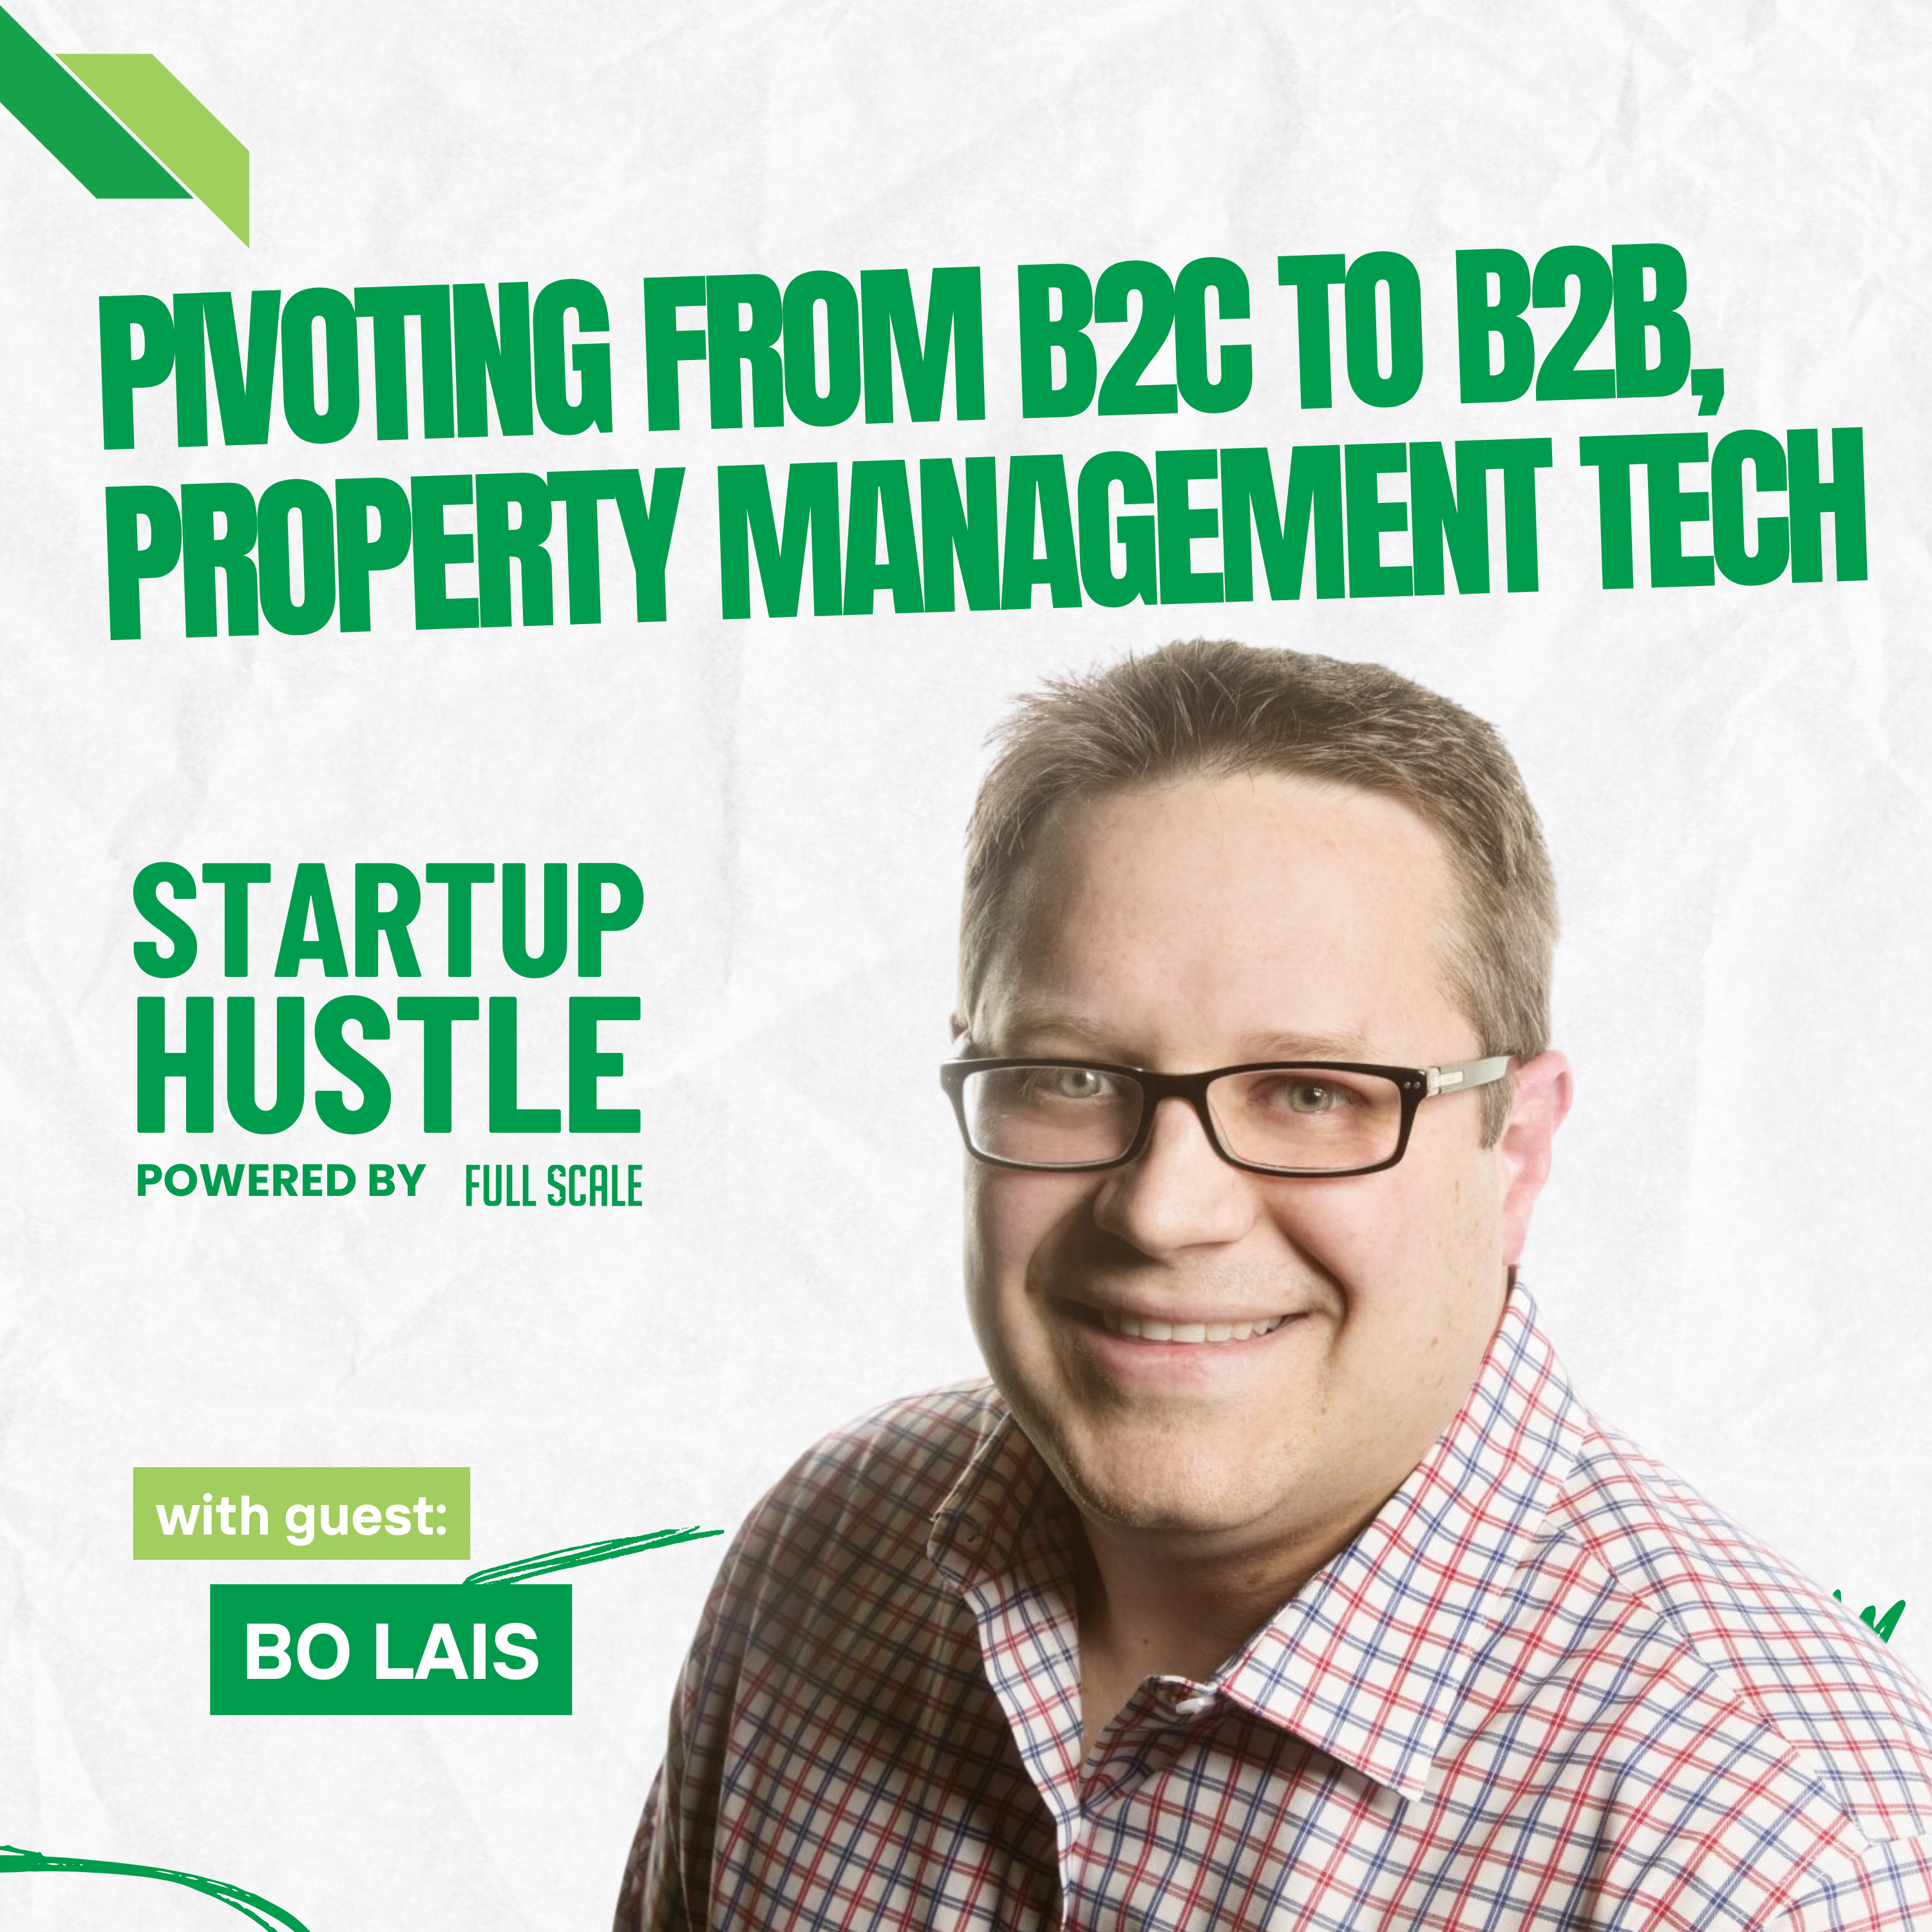 Pivoting from B2C to B2B, Property Management Tech